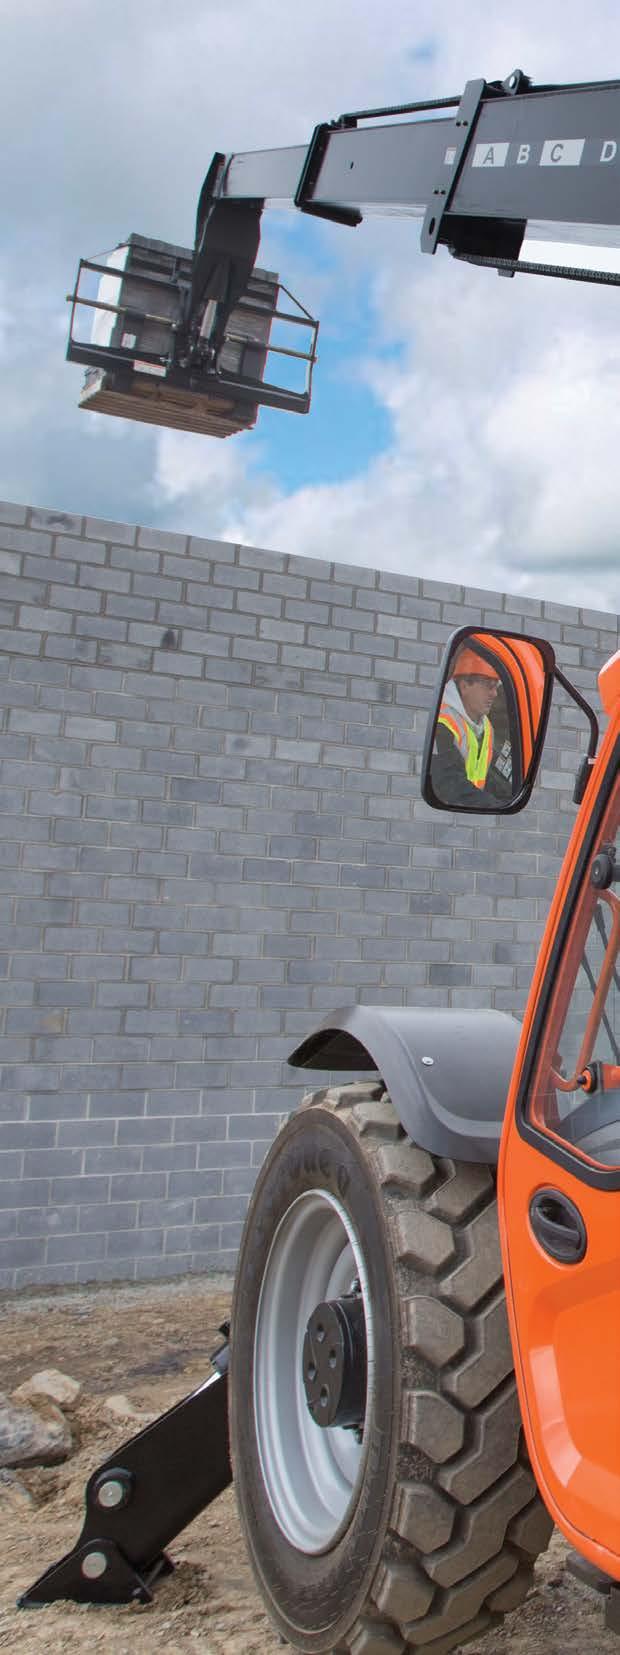 JLG TELEHANDLERS REACHING OUT Your productivity is on the line the minute you climb into the